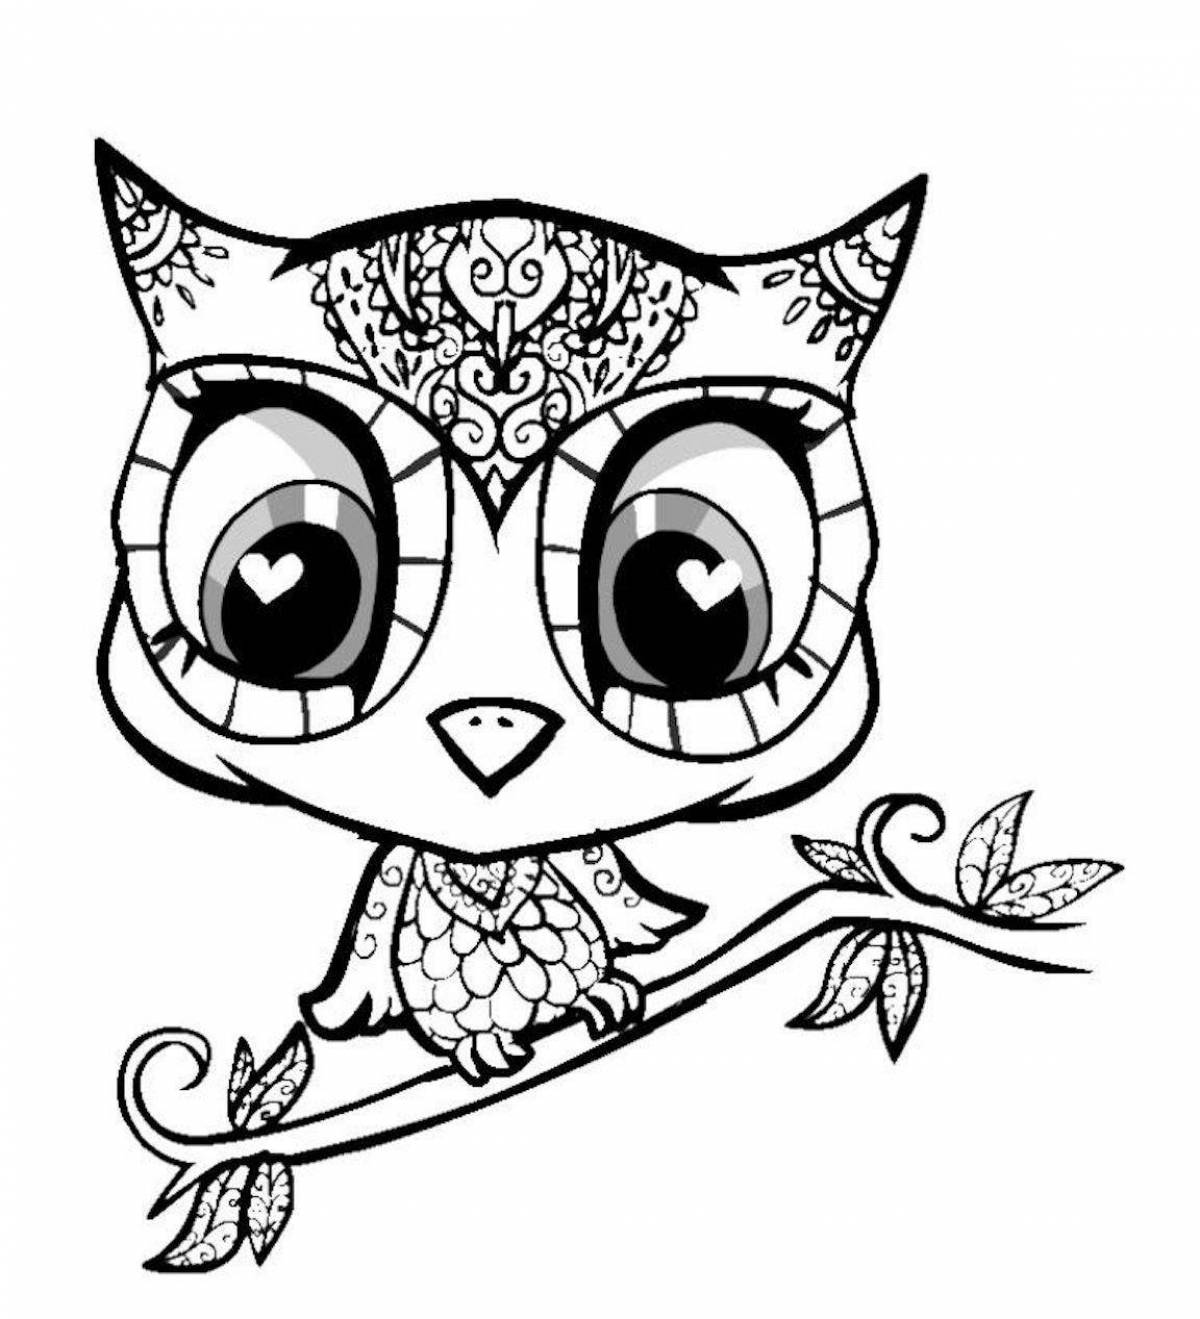 Adorable coloring book for girls animals cute 9 years old